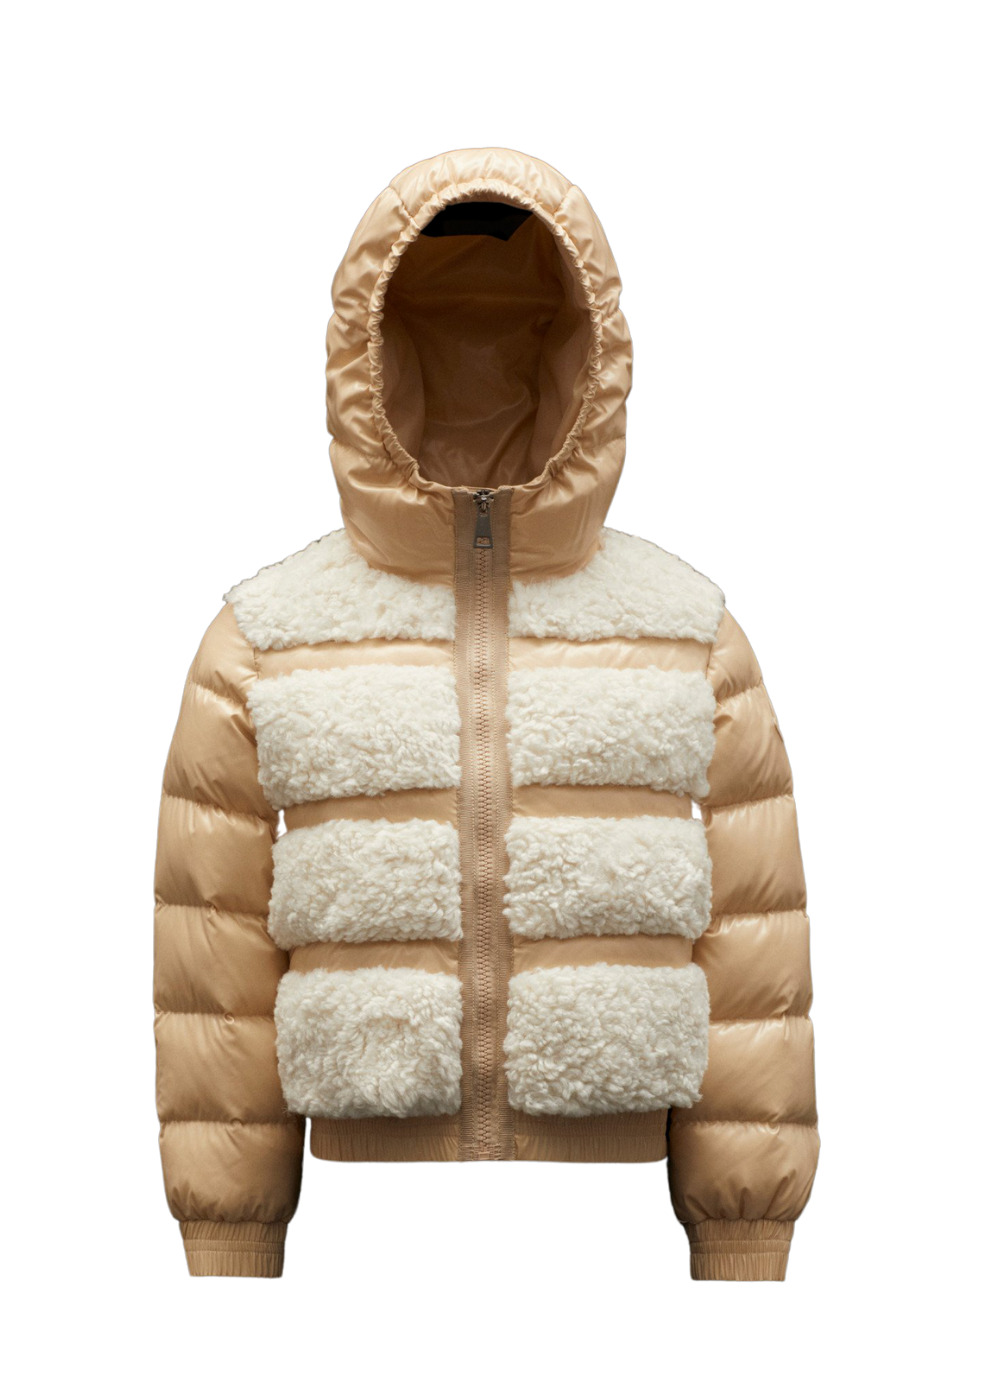 Featured image for “Moncler Gentiane Beige”